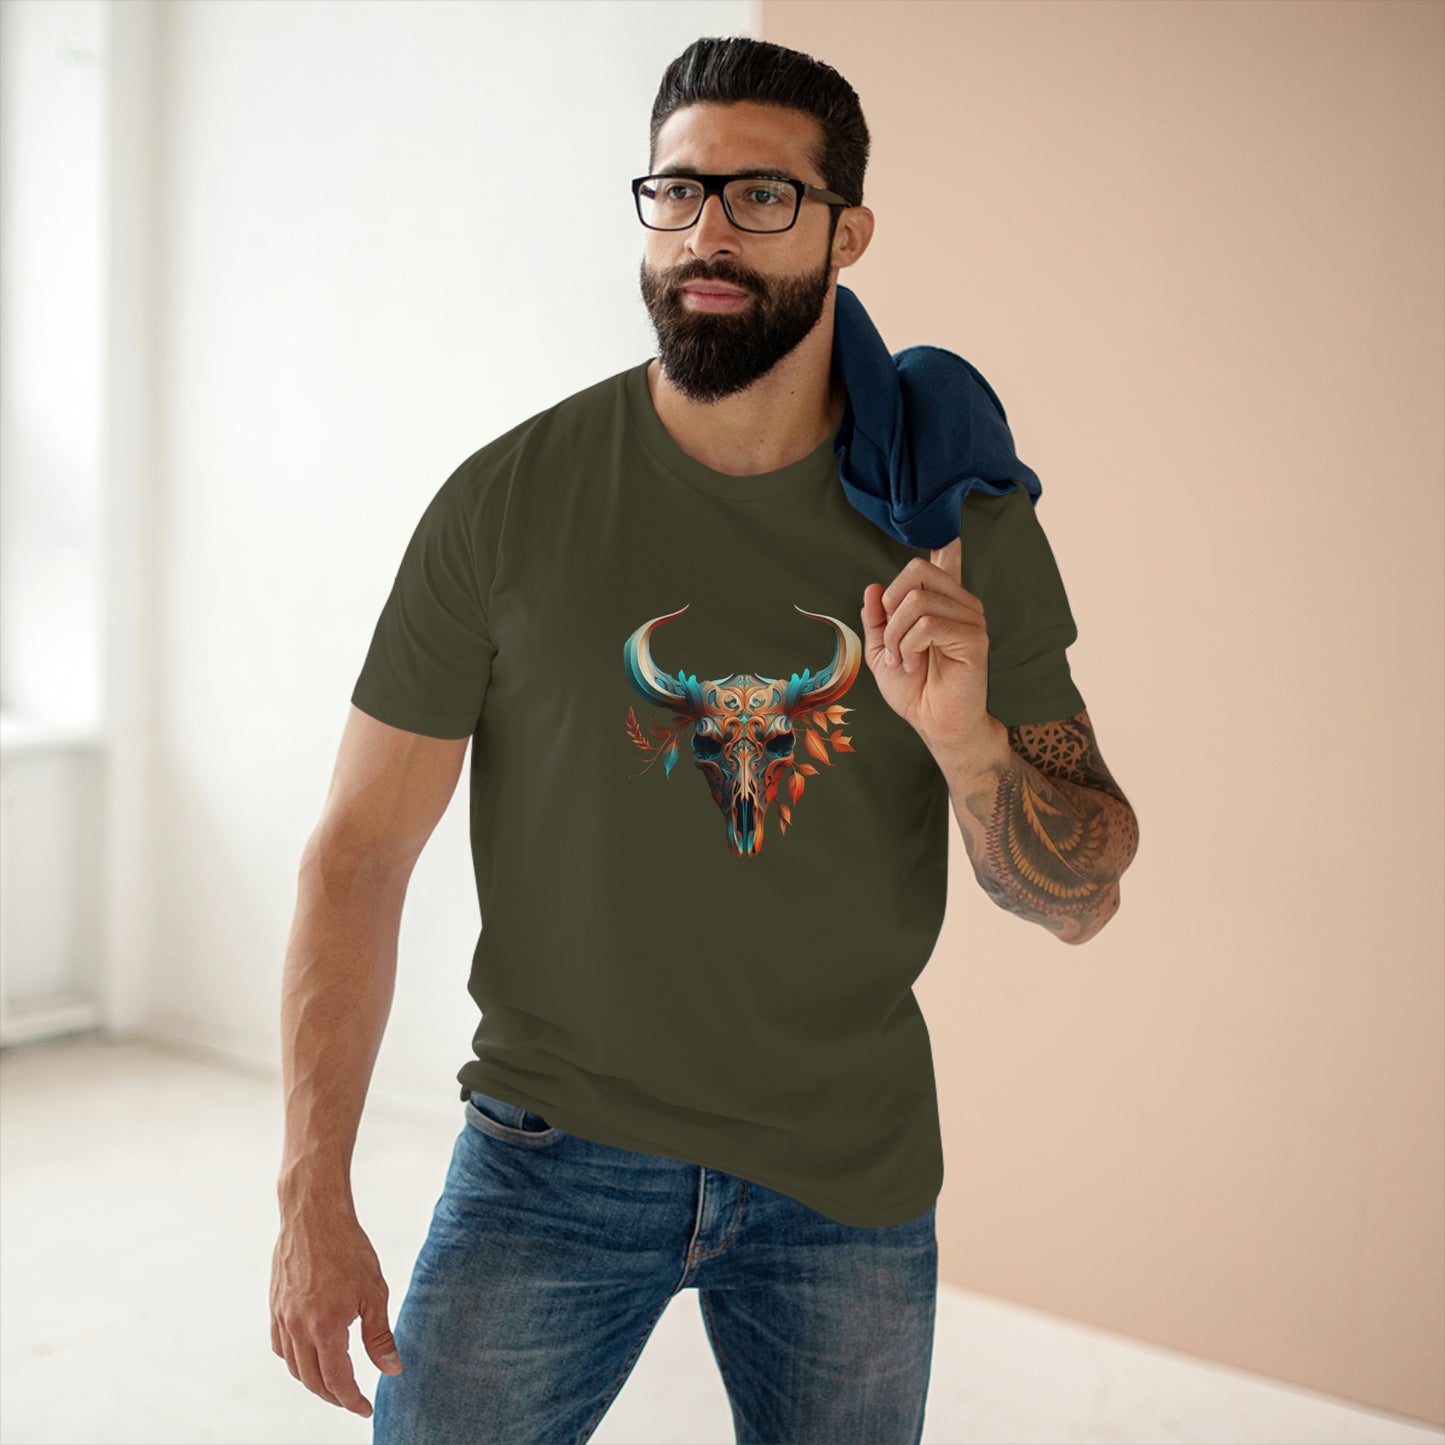 Men's dead and dusted Crew Neck T-shirt